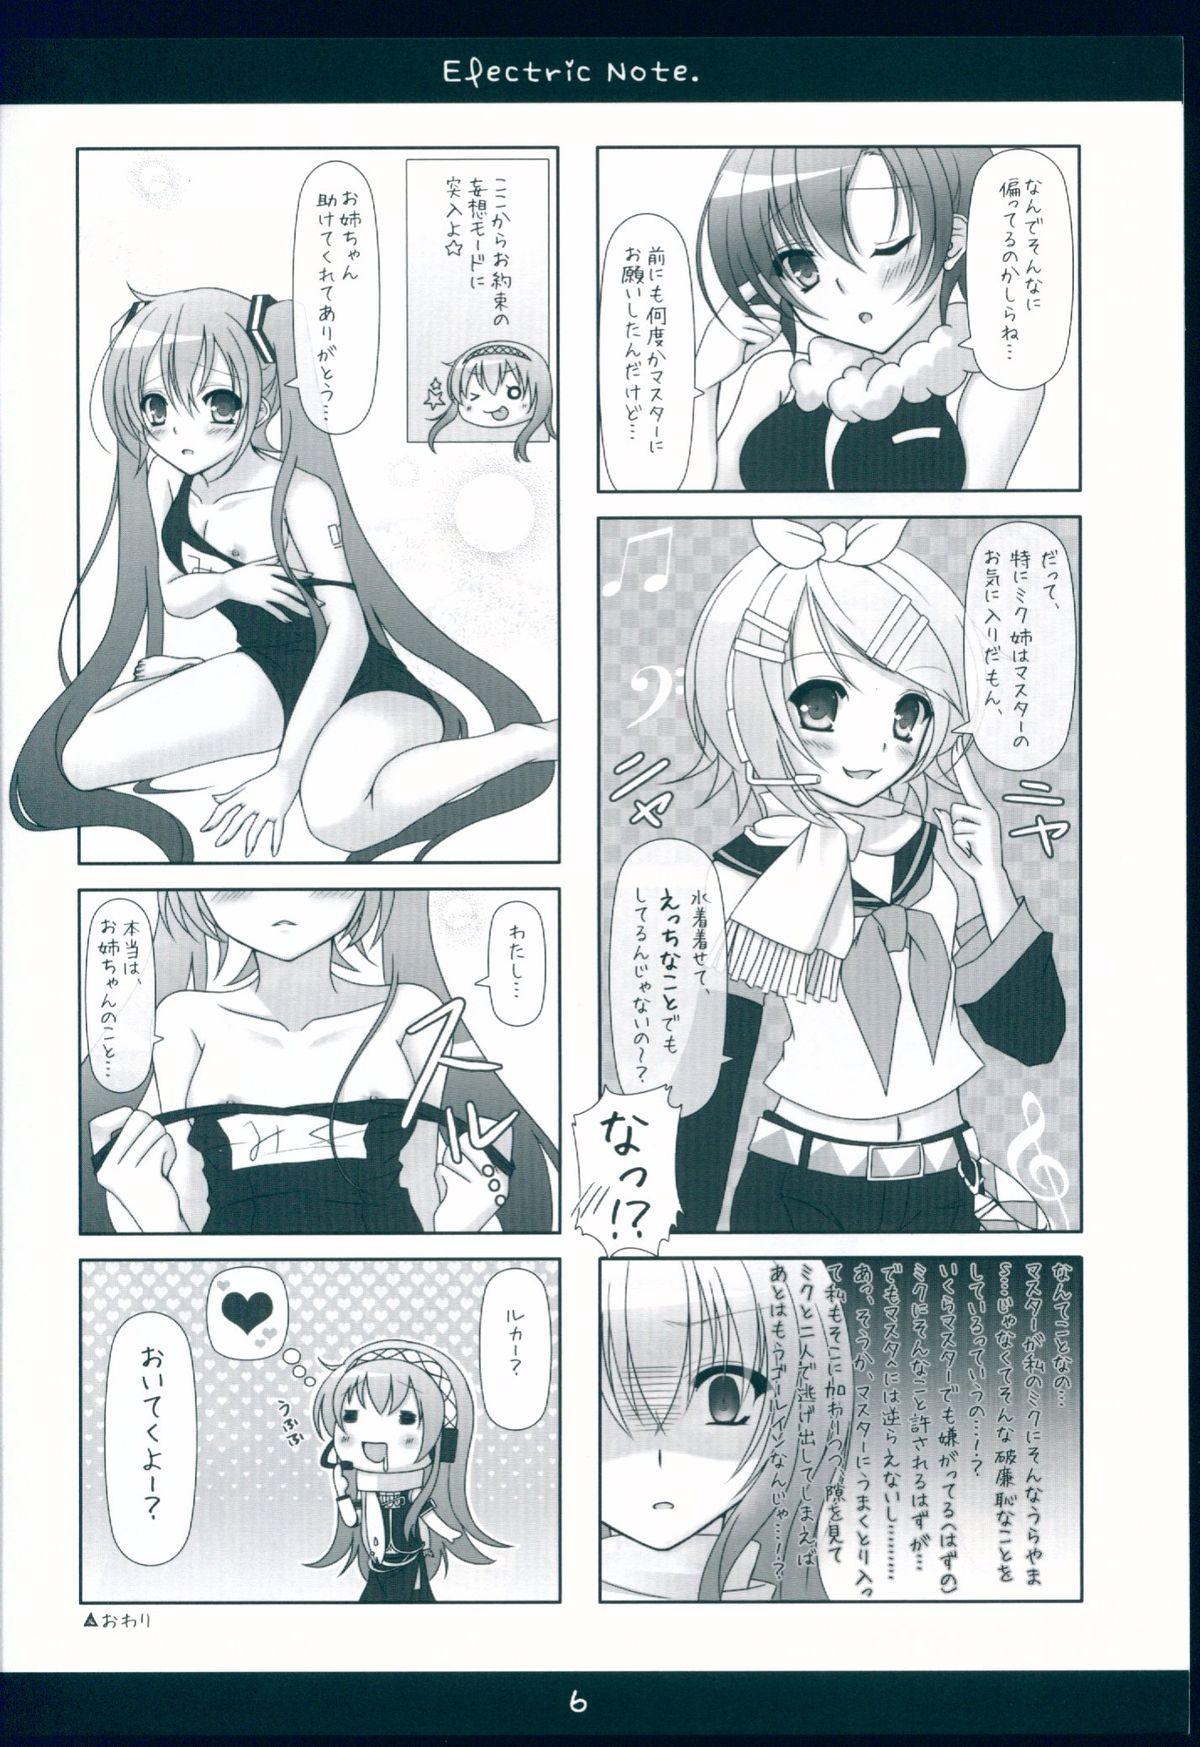 Sister Electric Note - Vocaloid Transex - Page 6